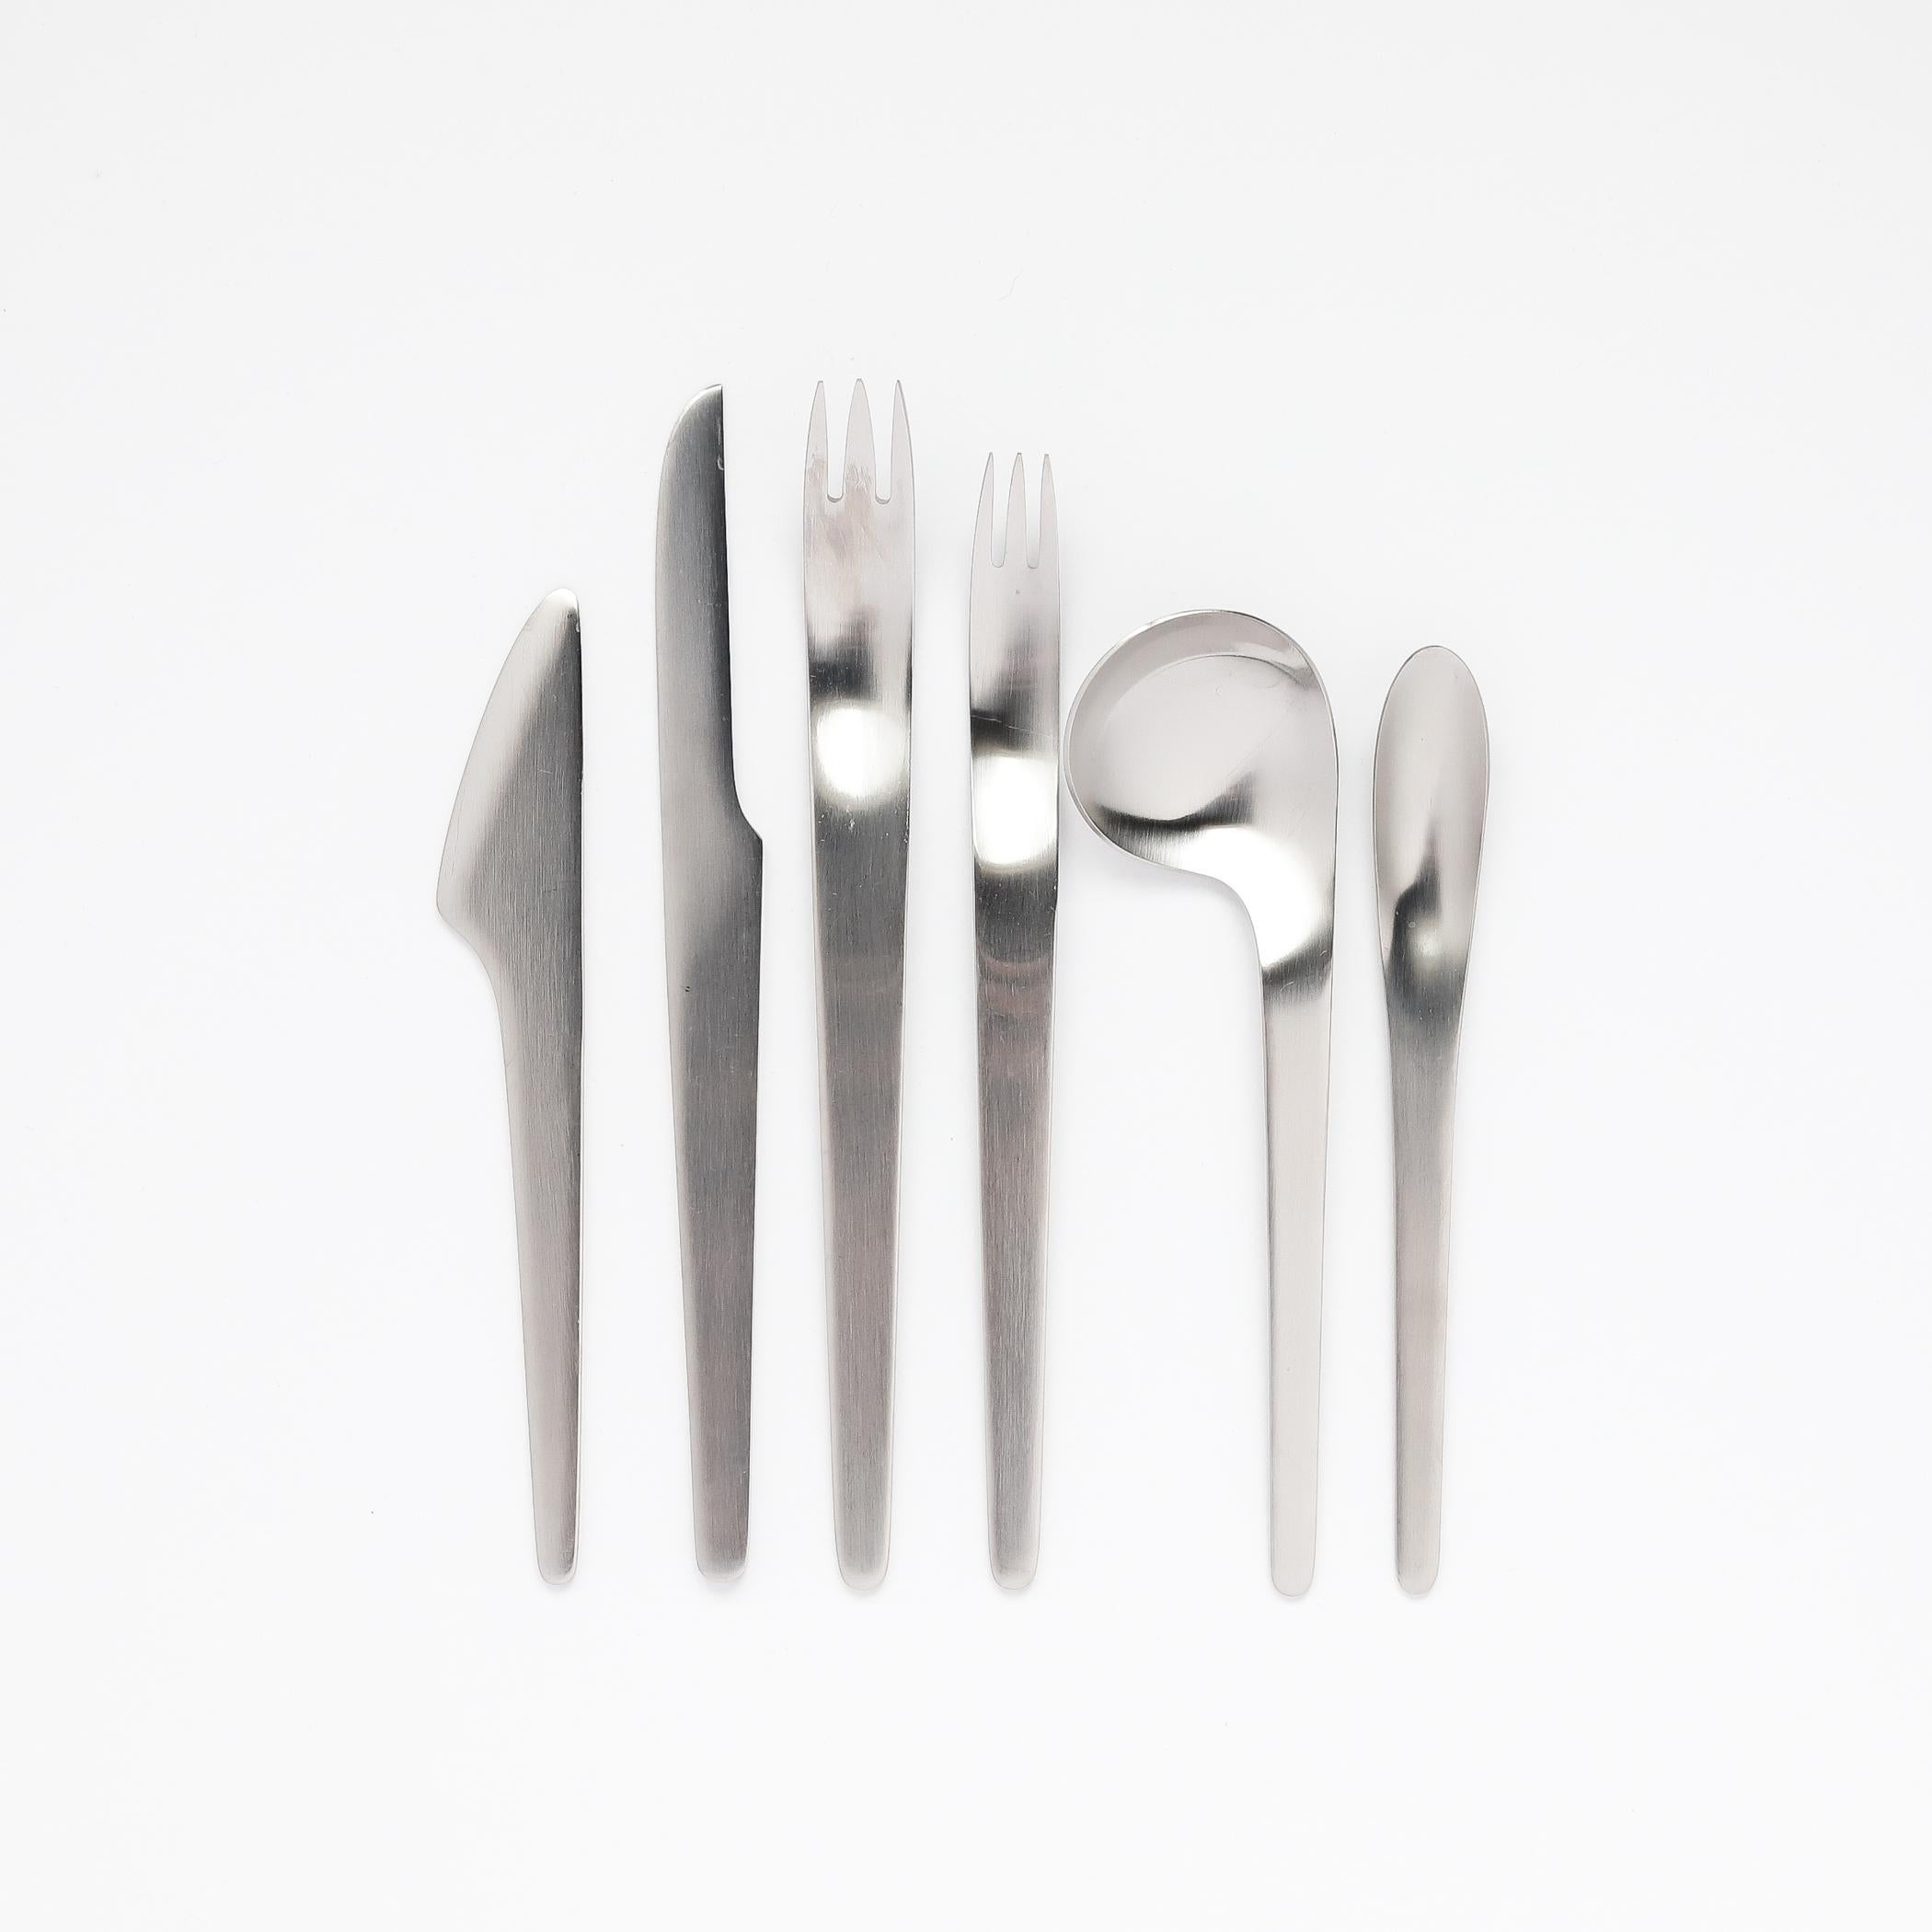 Stainless steel flatware service for 8, model 601, designed by Arne Jacobsen and produced by Danish manufacturer A. Michelsen. Jacobsen is also known for his space-age furniture designs such as the 'Egg' and 'Swan' chairs. 
 
Originally designed for